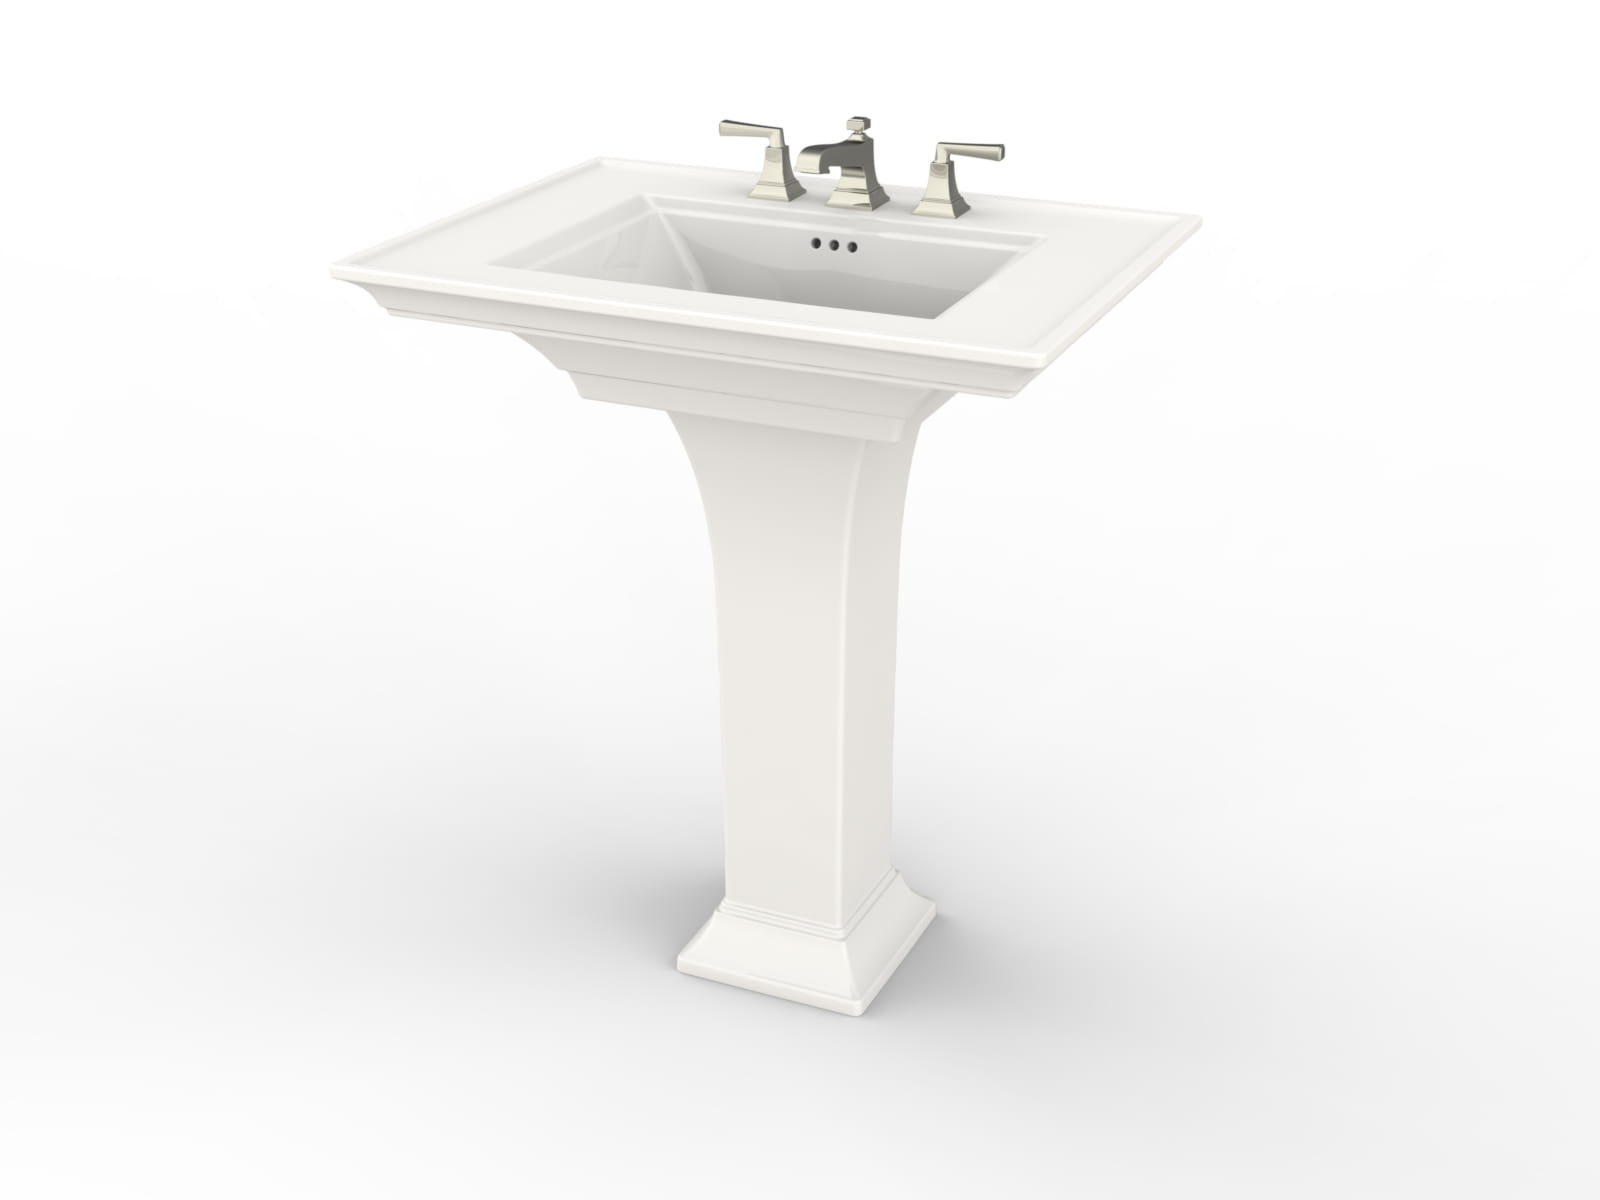 Town Square S 8 Inch Widespread Pedestal Sink Top and Leg Combination WHITE